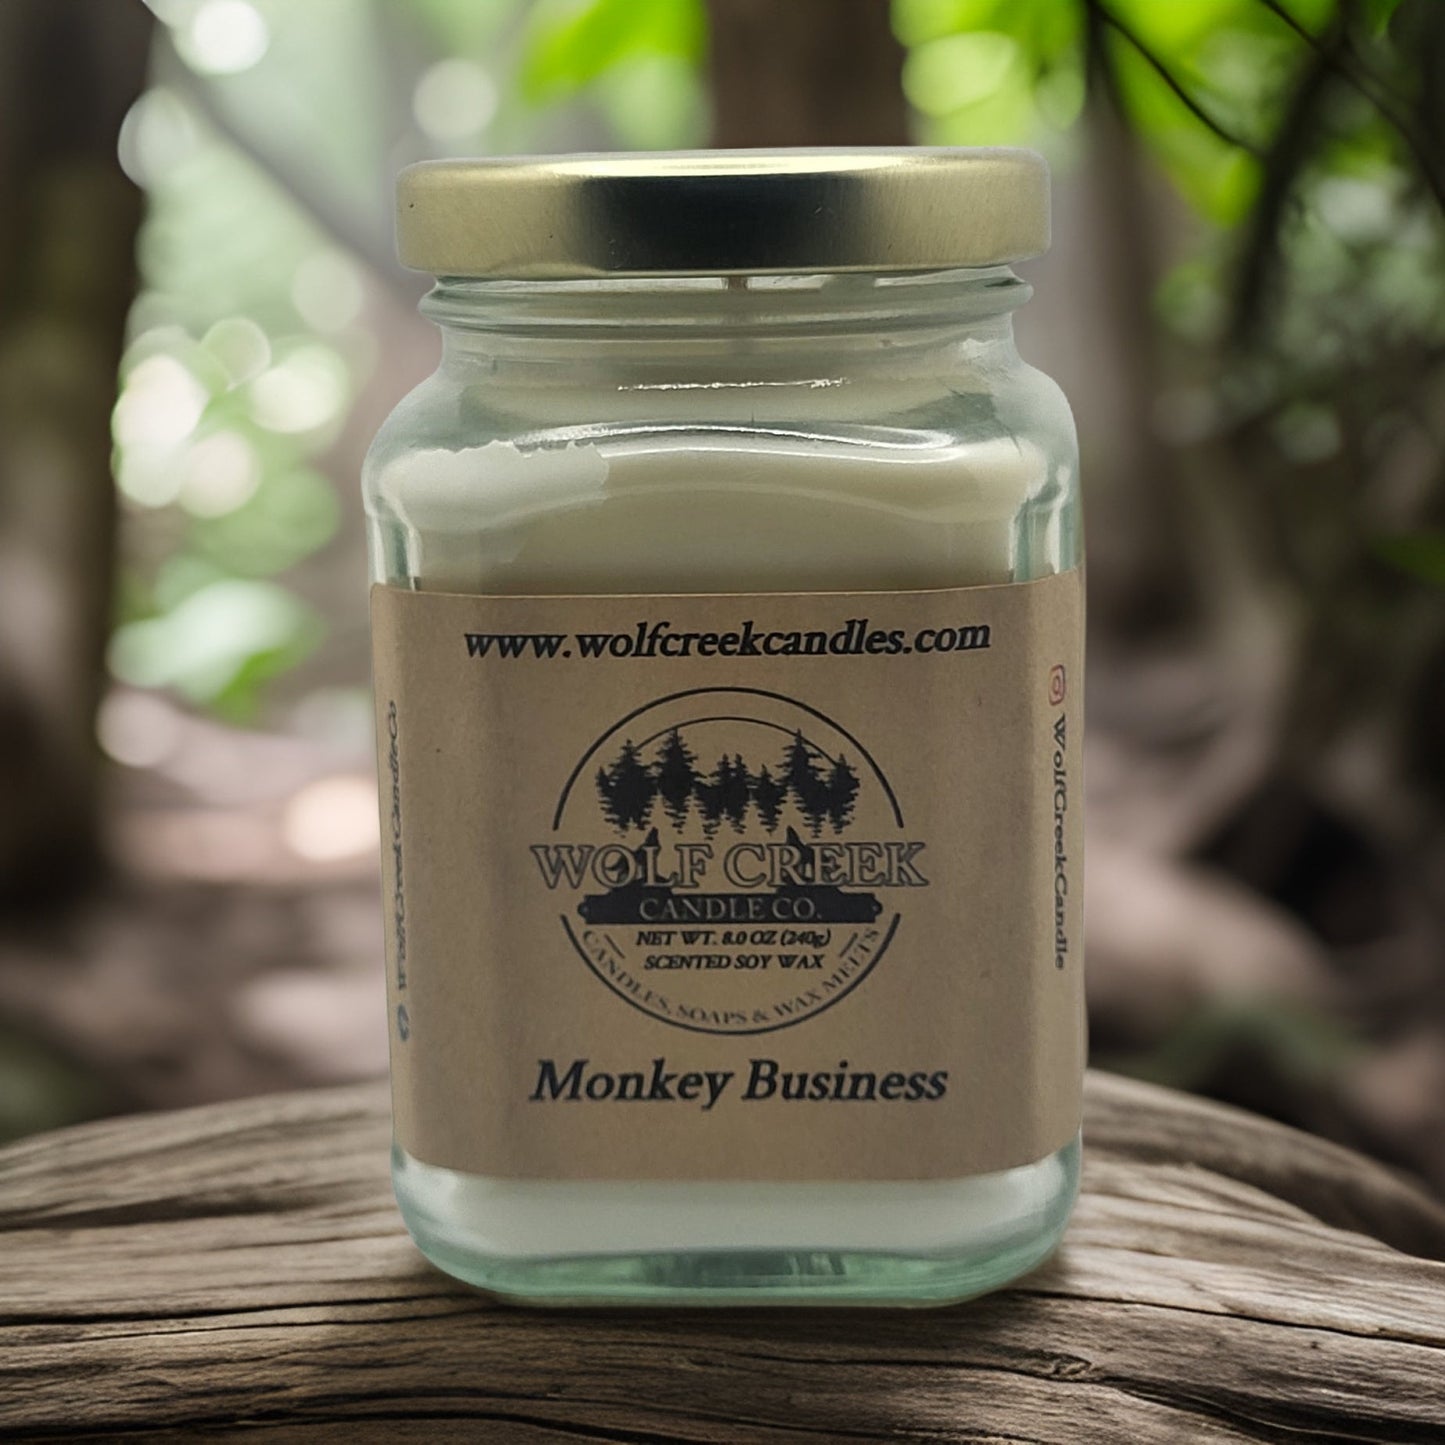 Monkey Business Soy Candle - Wolf Creek Candle Co.